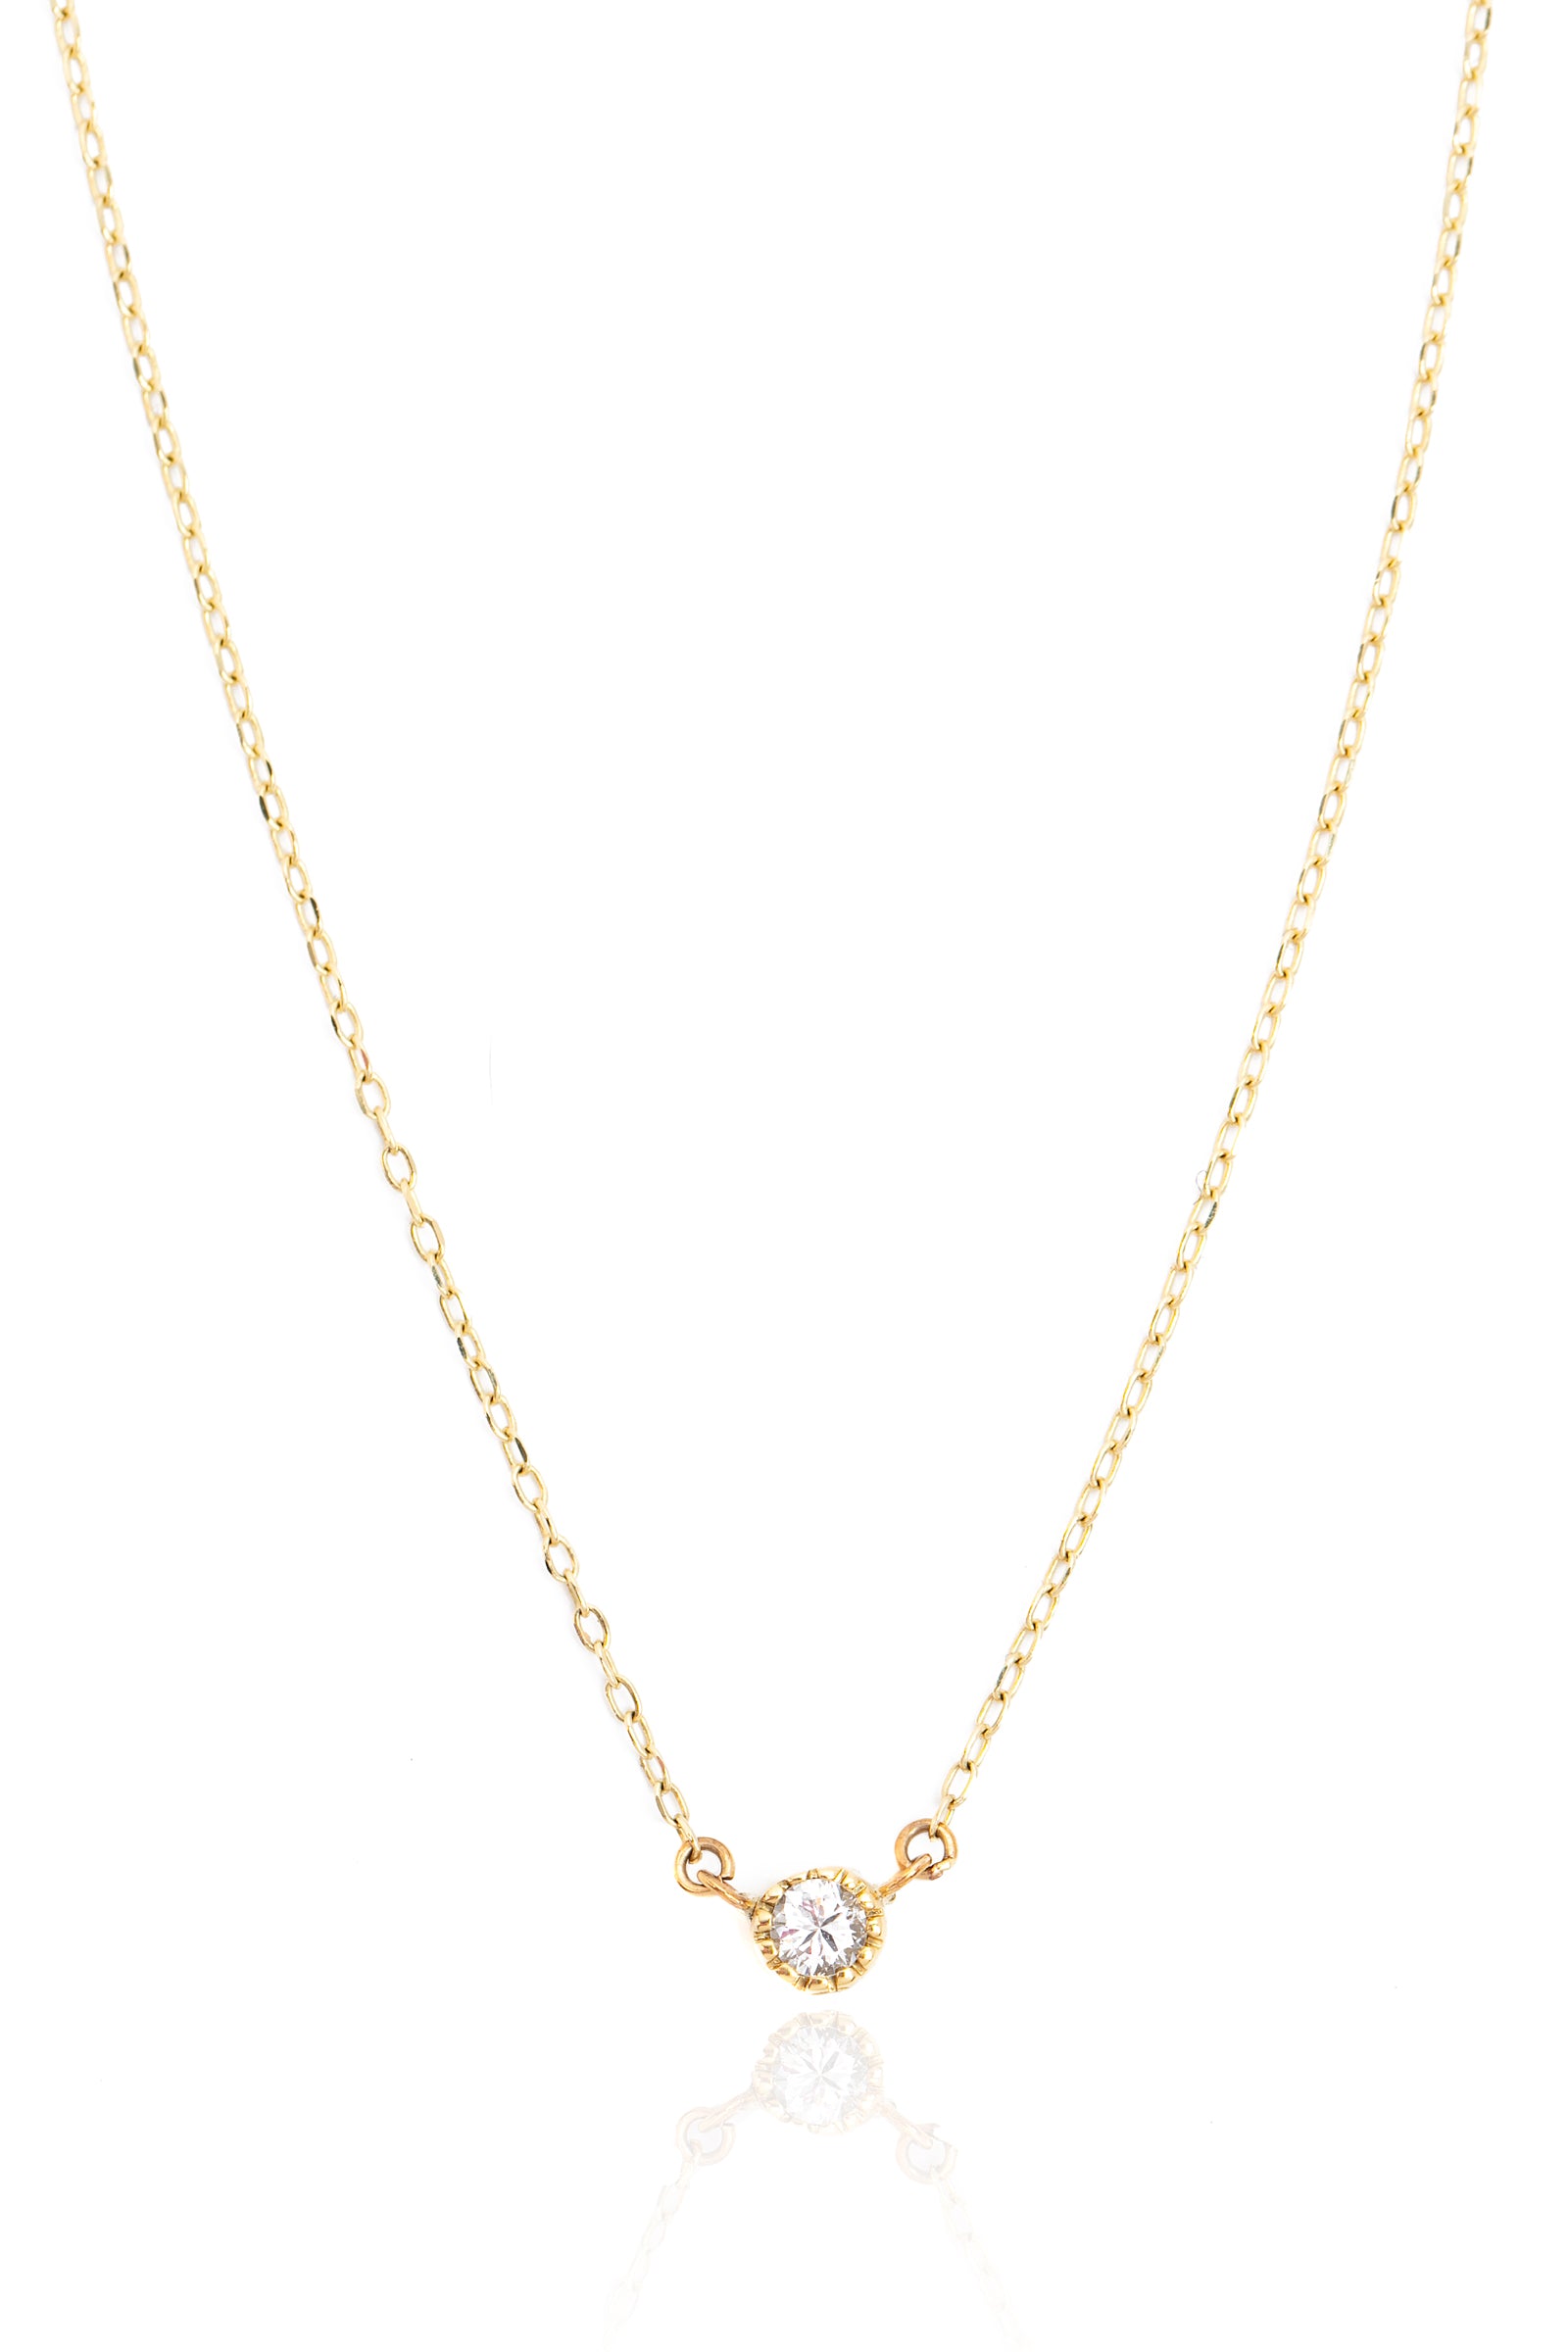 L.A. STEIN Single Vintage Set Diamond Necklace in Yellow Gold